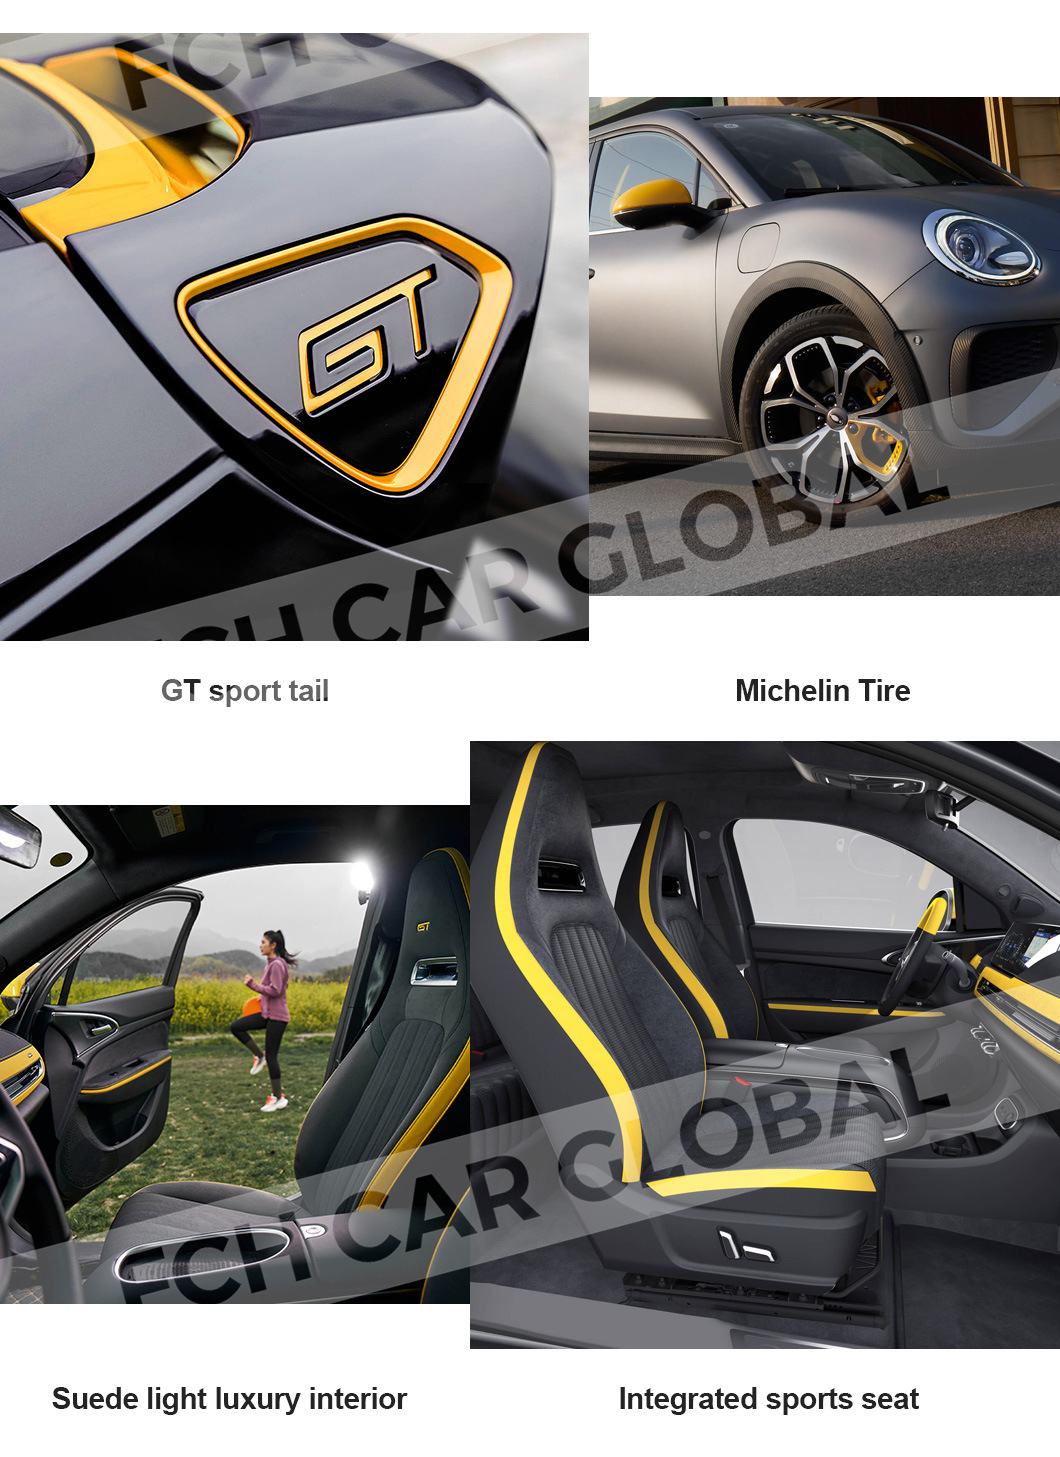 2023 Popular High Speed Automotive Cars Ora Goodcat Gt Electric Cars for Sale Adult New Energy Vehicles Made in China